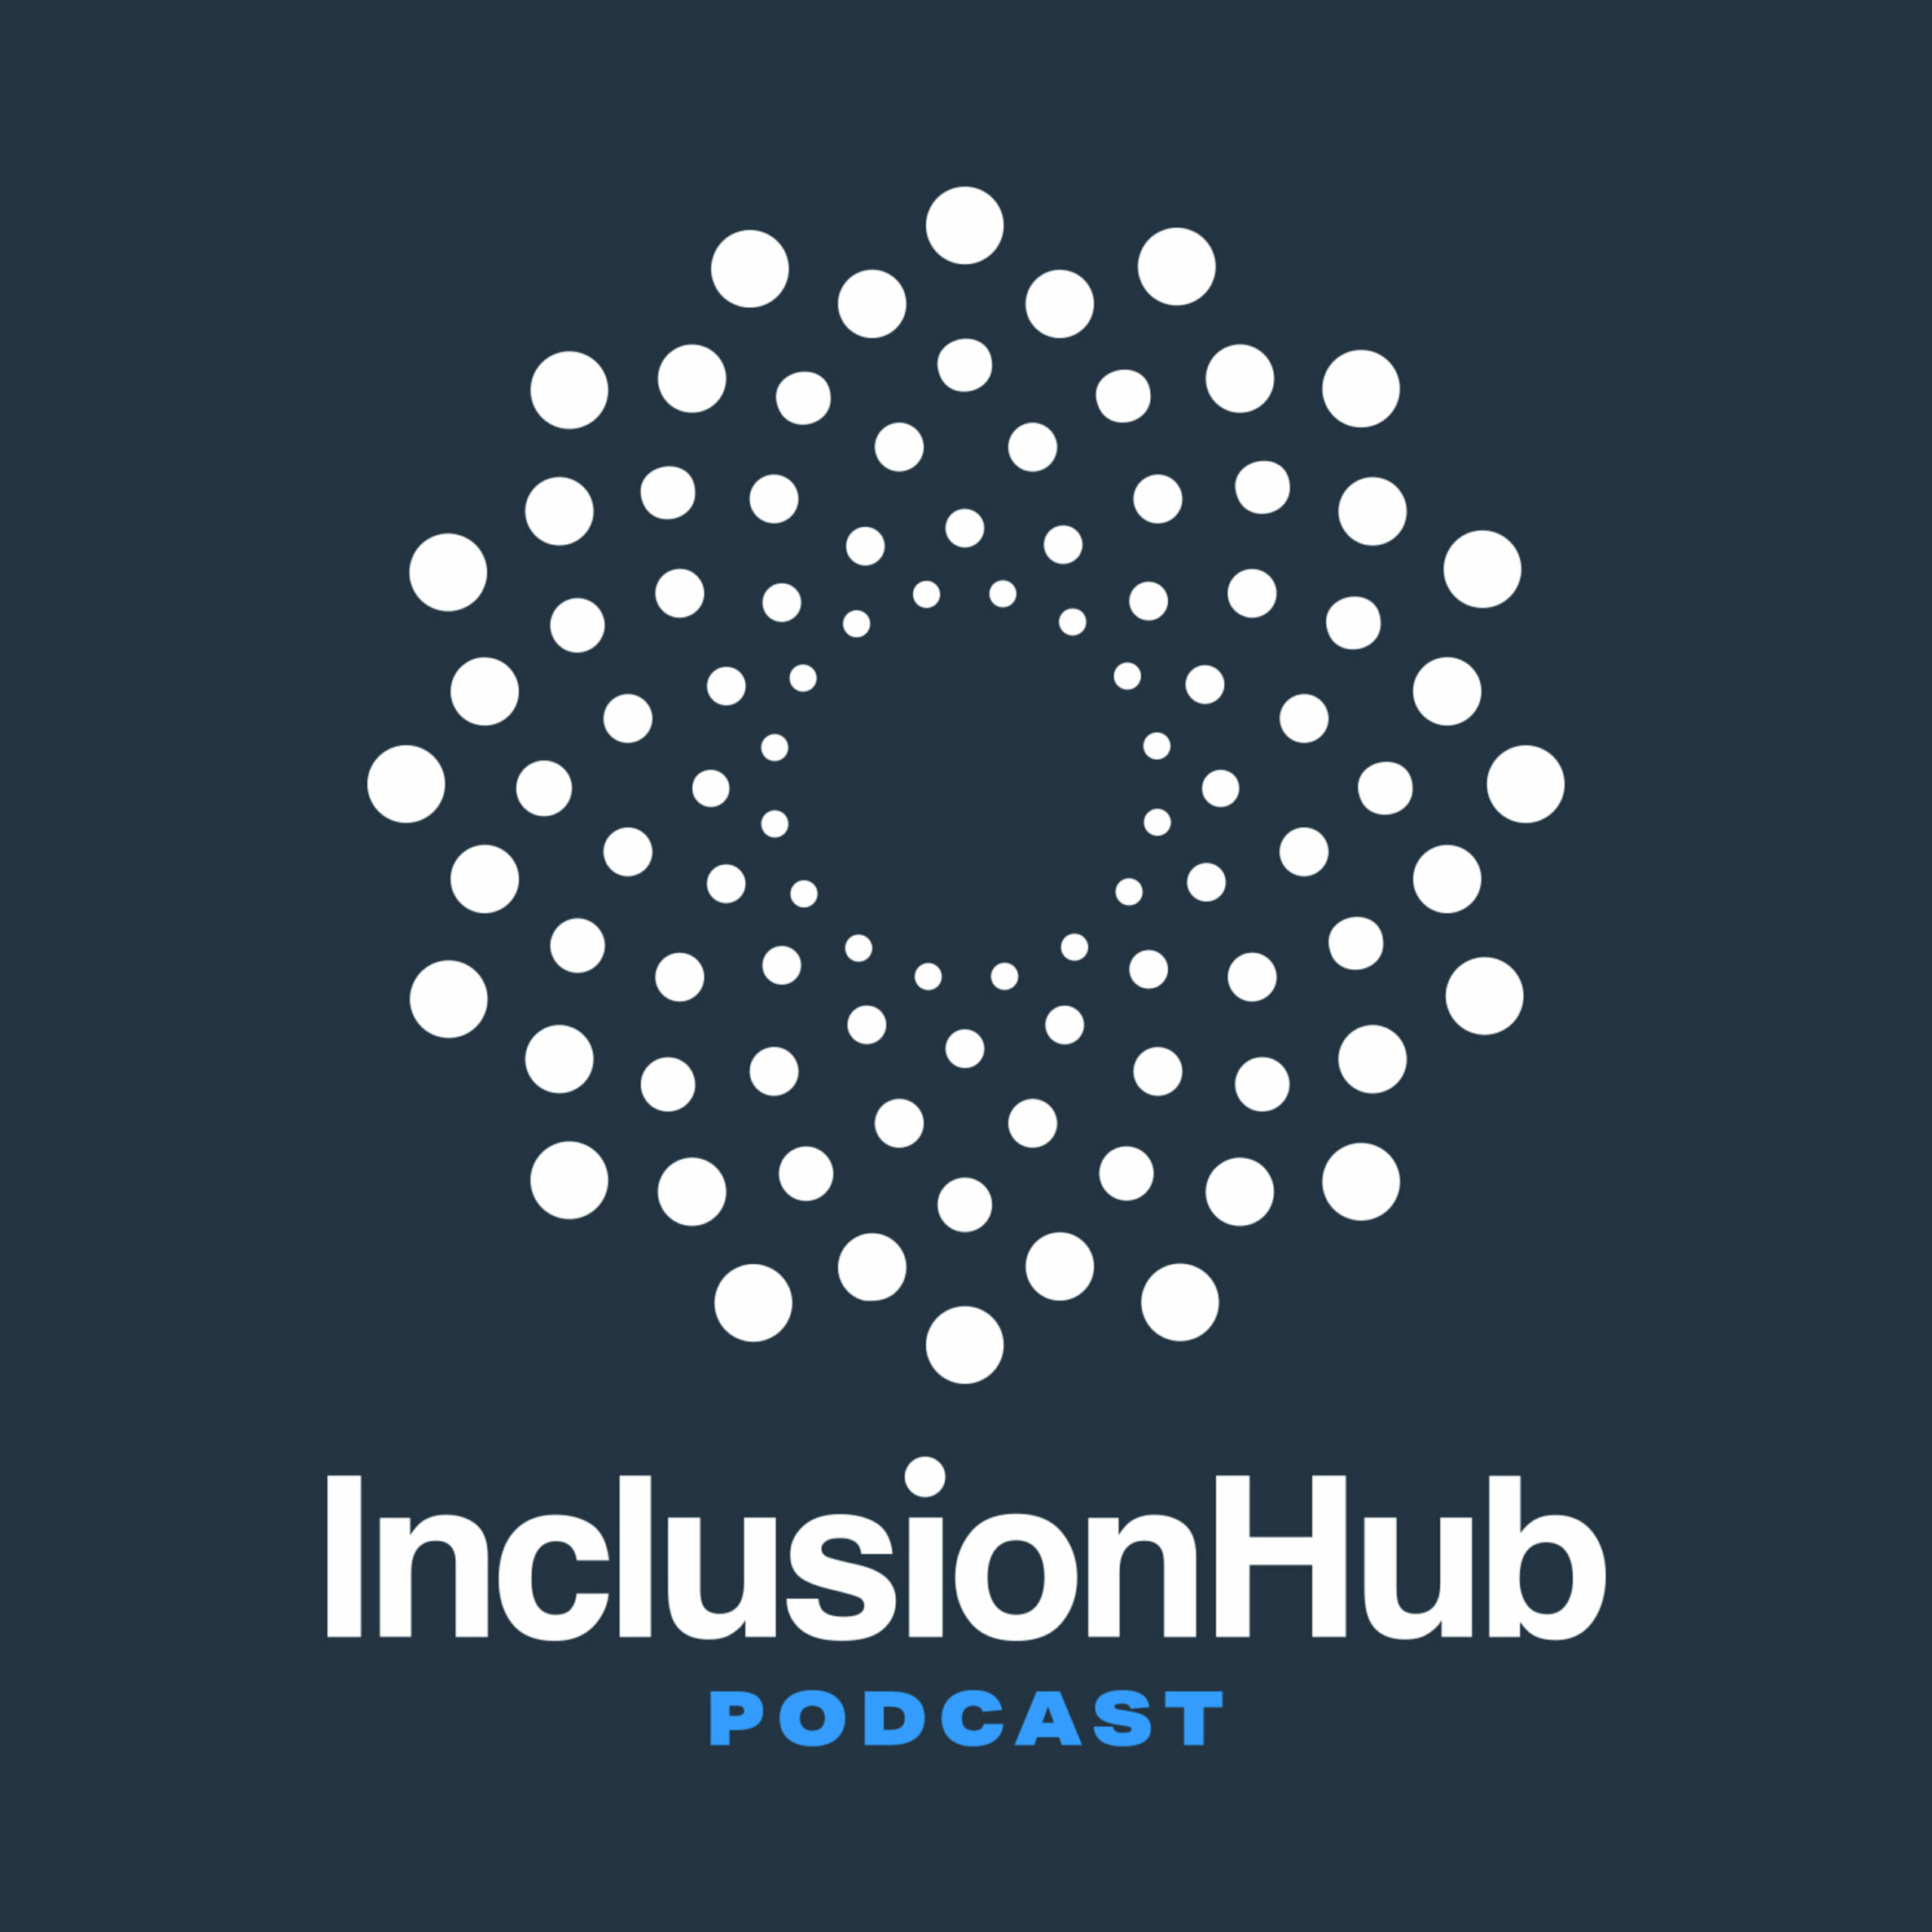 Abstract art design - Logo for the InclusionHub Podcast